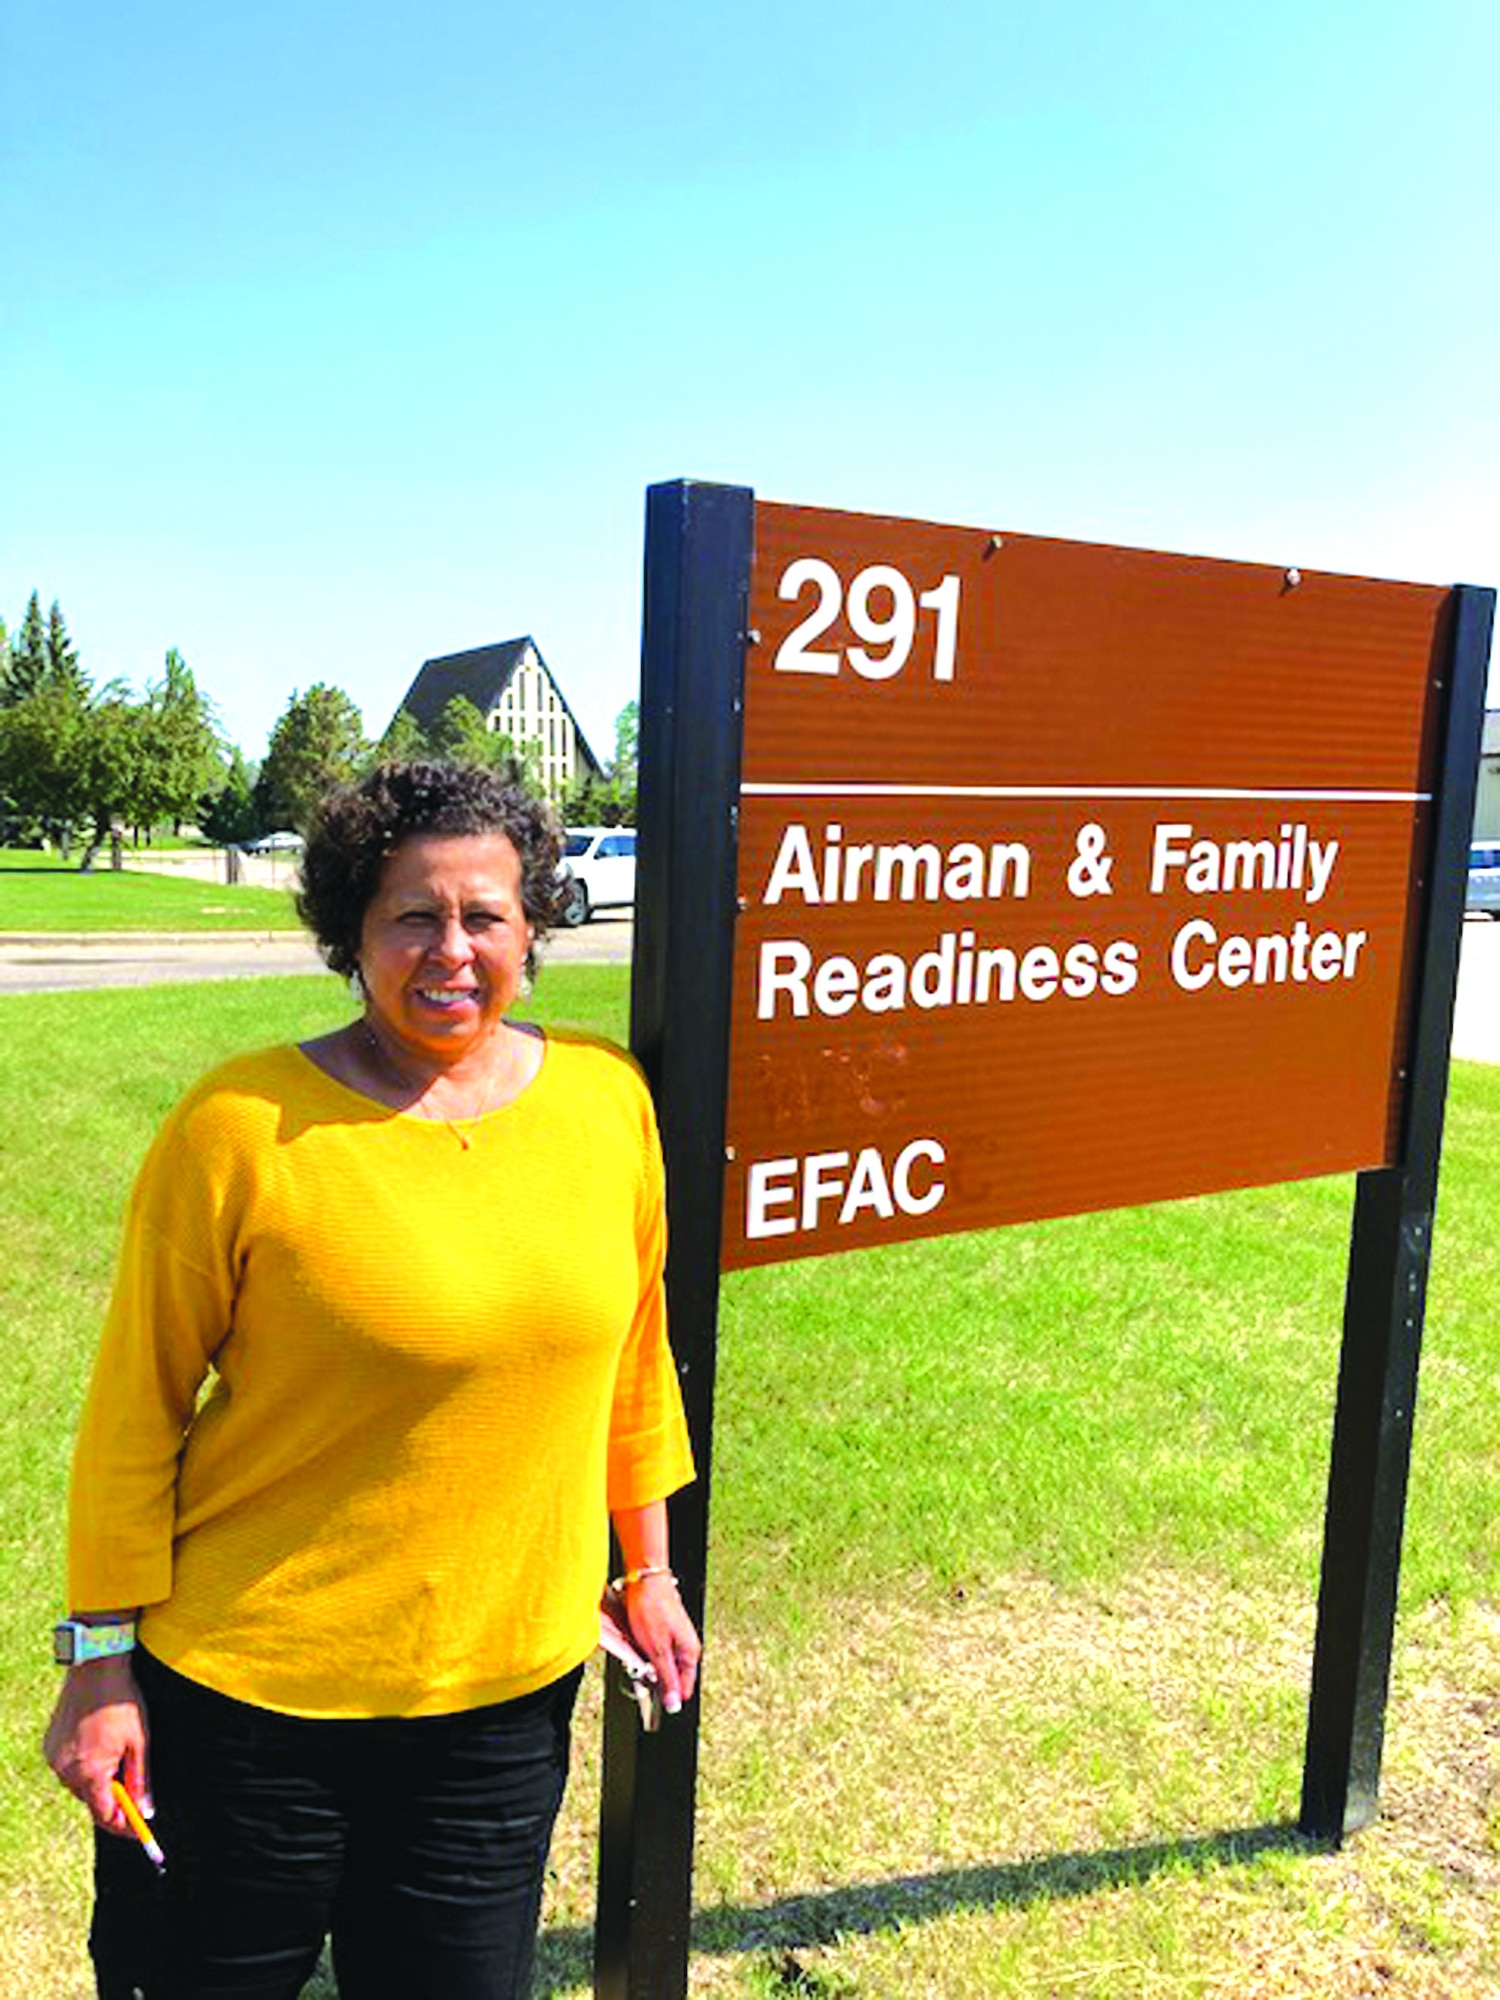 The Airmen and Family Readiness Center has a new Family Support Coordinator for the Exceptional Family Member Program (EFMP): Jenny Hartman! For 11 years, Hartman worked under the Navy’s EFMP in San Diego, Calif., before coming to Minot Air Force Base in May 2021.